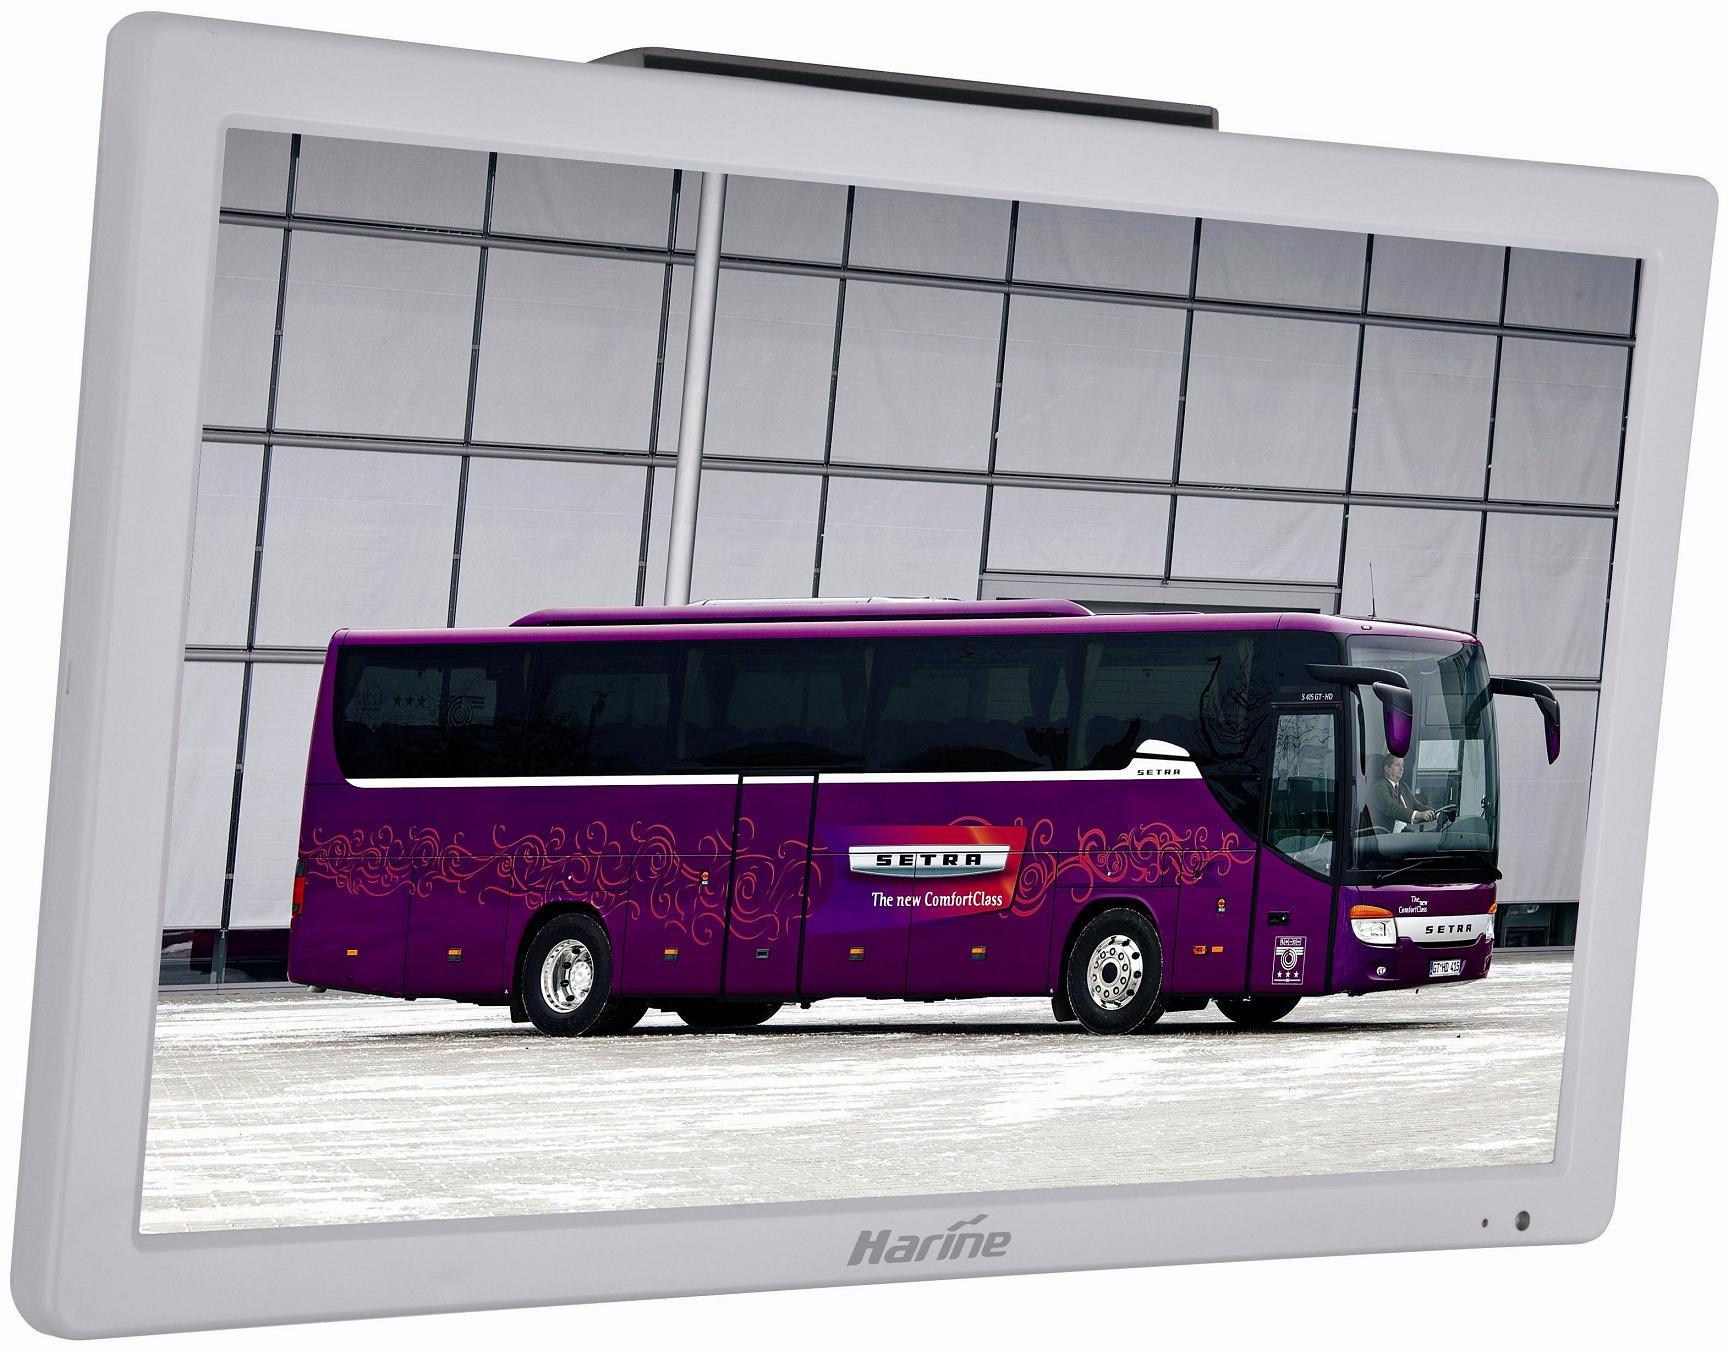 18.5 Inch Bus Video LCD Display Bus Color TV